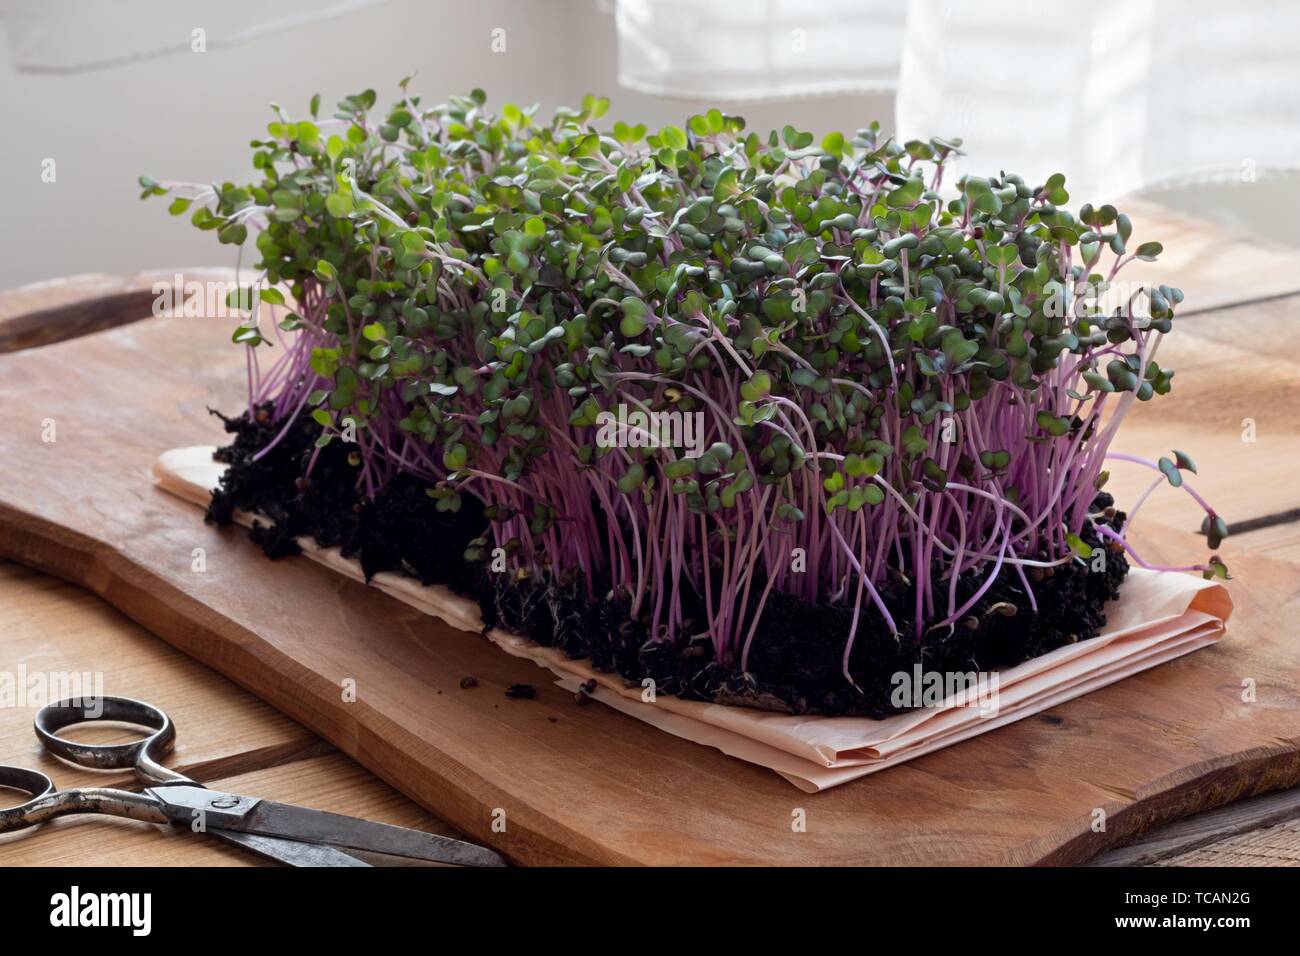 Red cabbage microgreens on a wooden table. Stock Photo